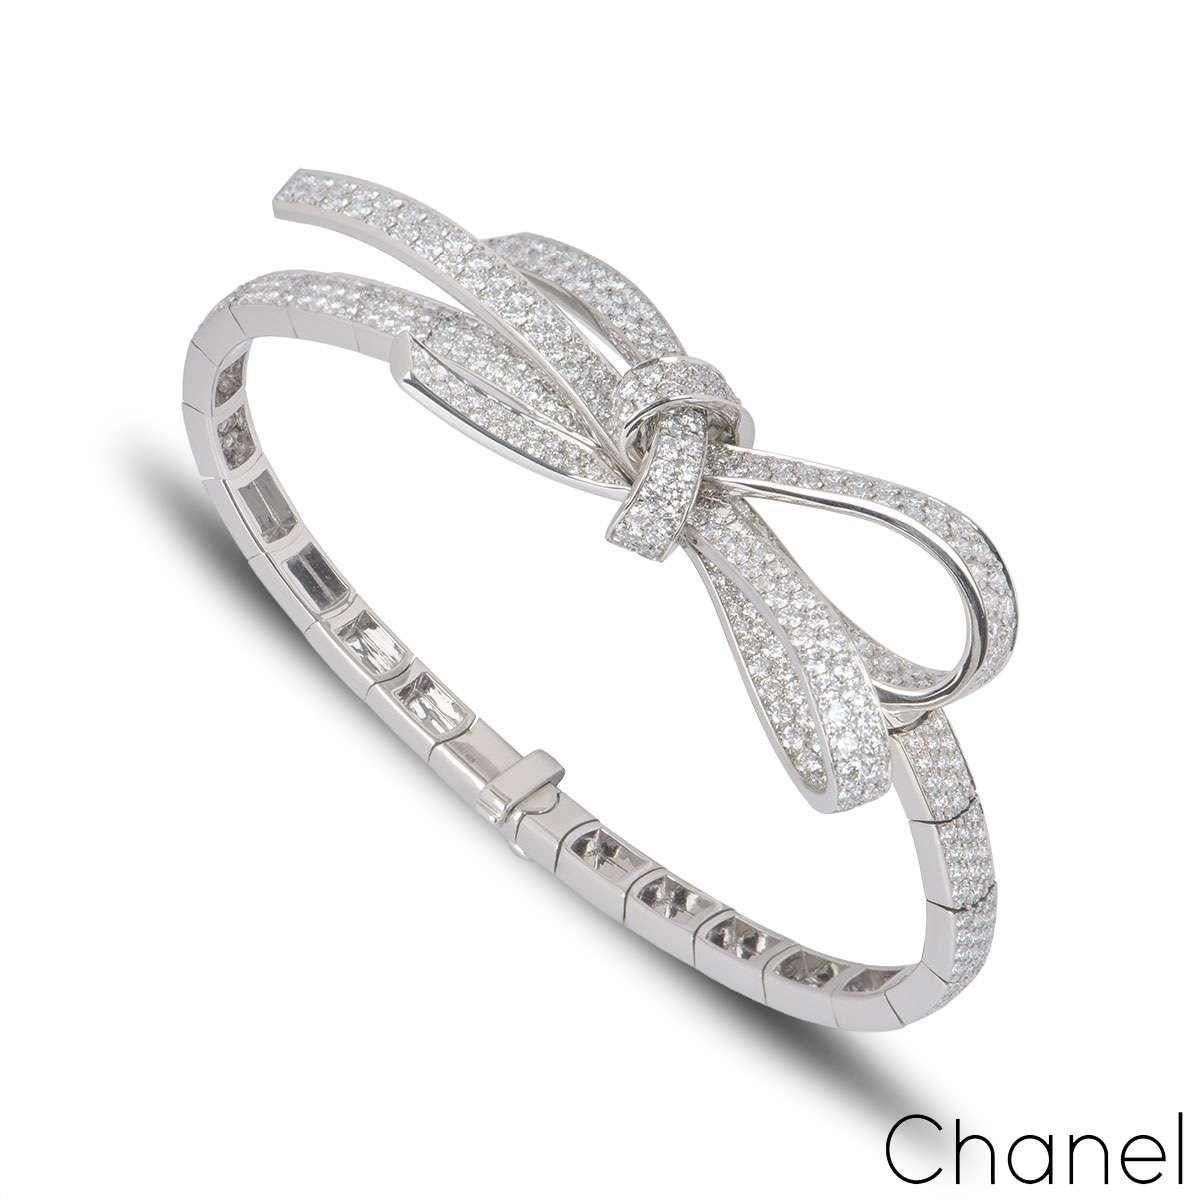 A stunning 18k white gold diamond bracelet from the Ruban collection by Chanel. The bracelet has a large pave diamond ribbon motif with diamond set flexi links. There are 389 diamonds with a total carat weight of 5.59ct. The ribbon motif measures